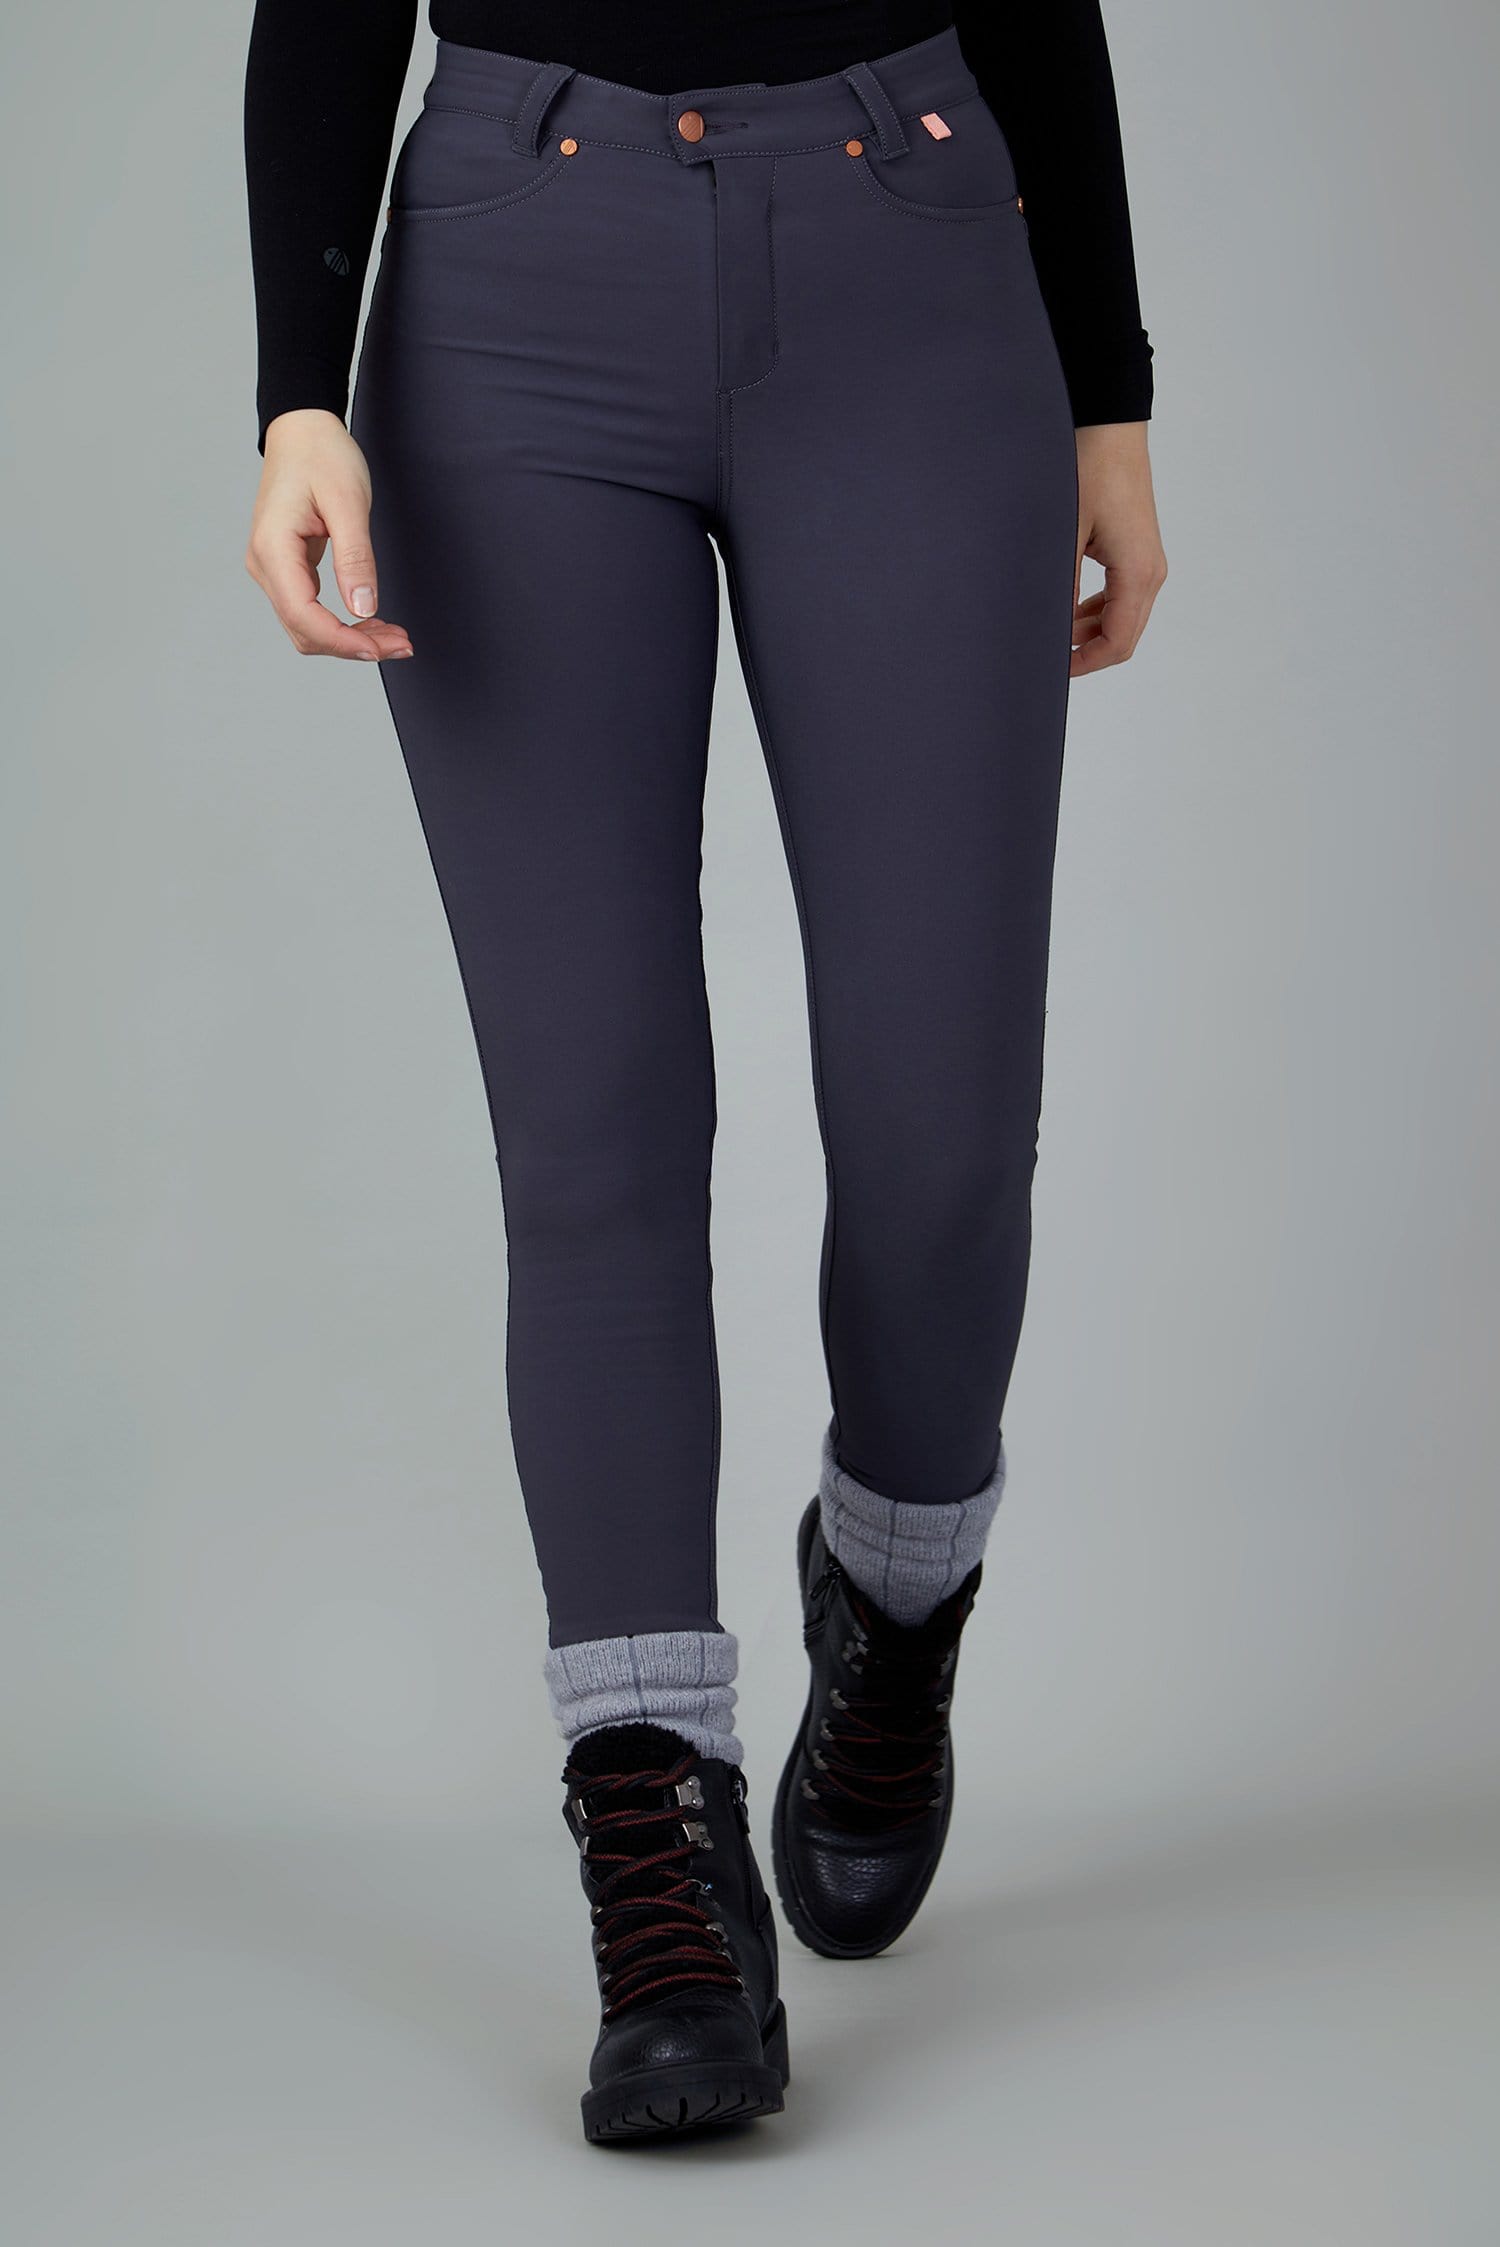 The Aventurite Stretch Skinny Outdoor Trousers - Obsidian - 24r / Uk6 - Womens - Acai Outdoorwear